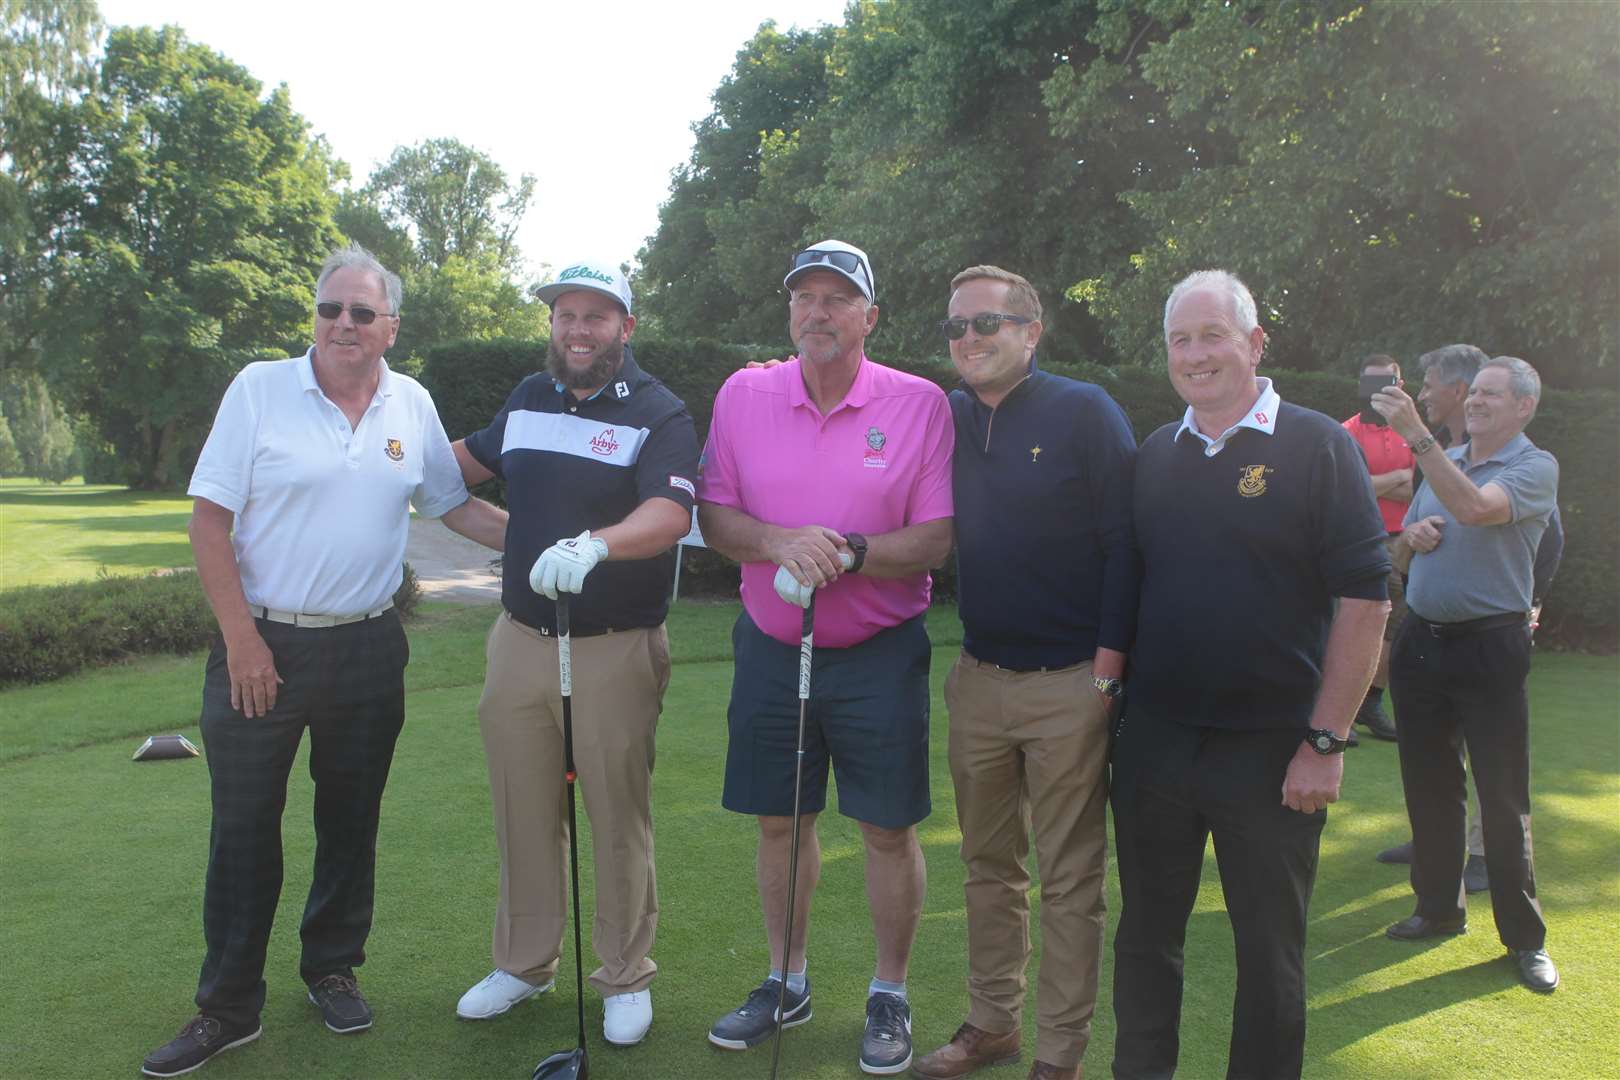 From left, John Foggerty, Captain, Ian Botham, Andrew Johnston, Jamie Lane, a caddie for Matt Fitzpatrick and Chris Twiner, sponsor at Lamberhurst Golf whereBotham and Johnston were flown in to play one round of golf at the 18th hole to raise money for charity. Picture by: John Westhrop (2422749)